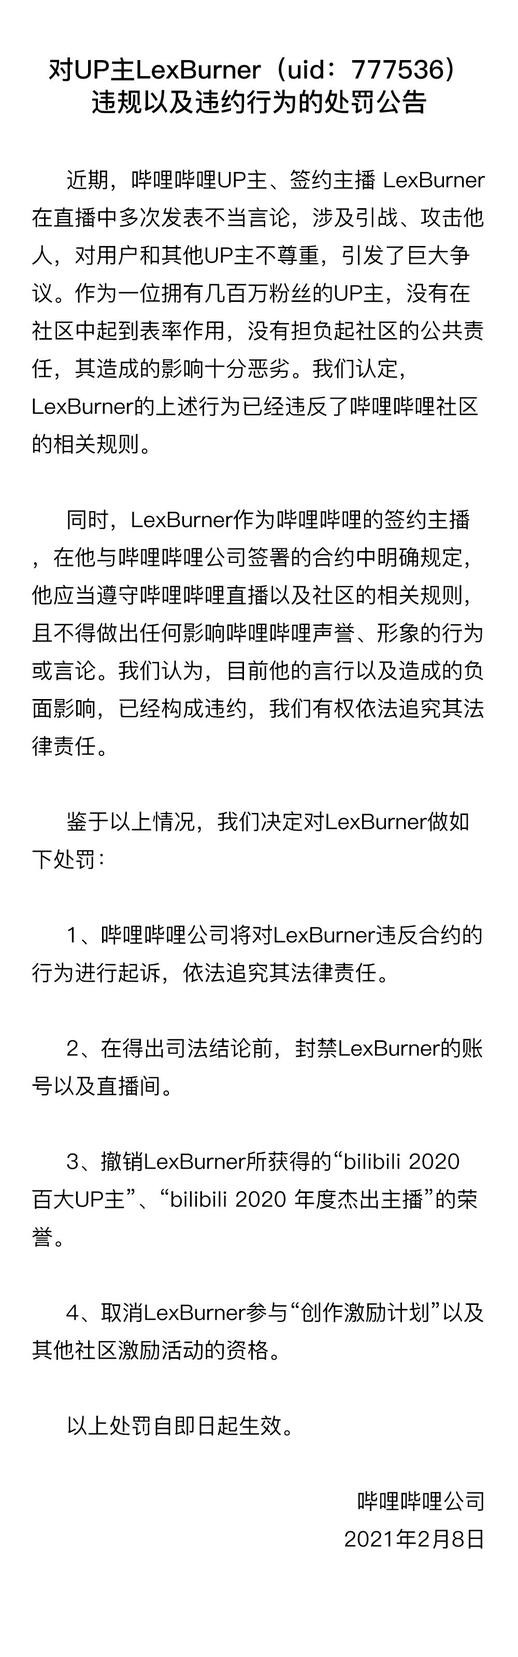 B station UP advocate LexBurner is sealed ban or face legal punishment